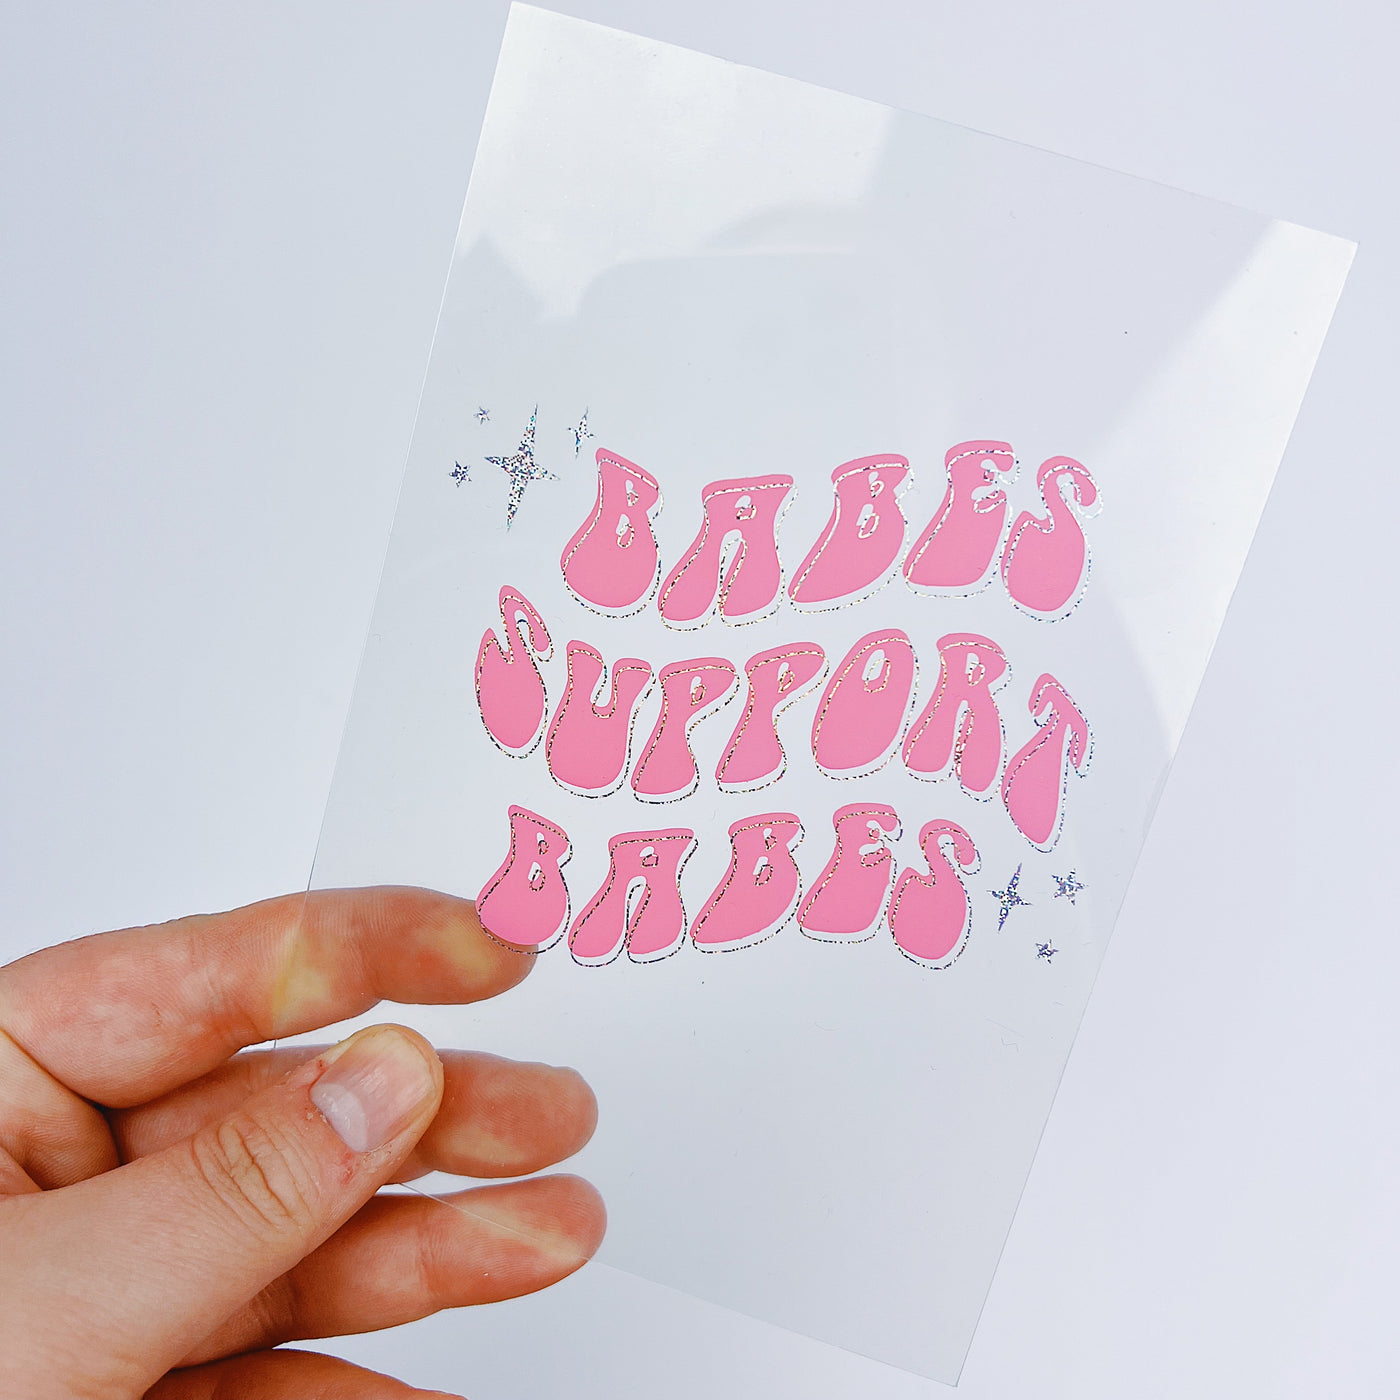 Babes Support Babes Clear Journal Card